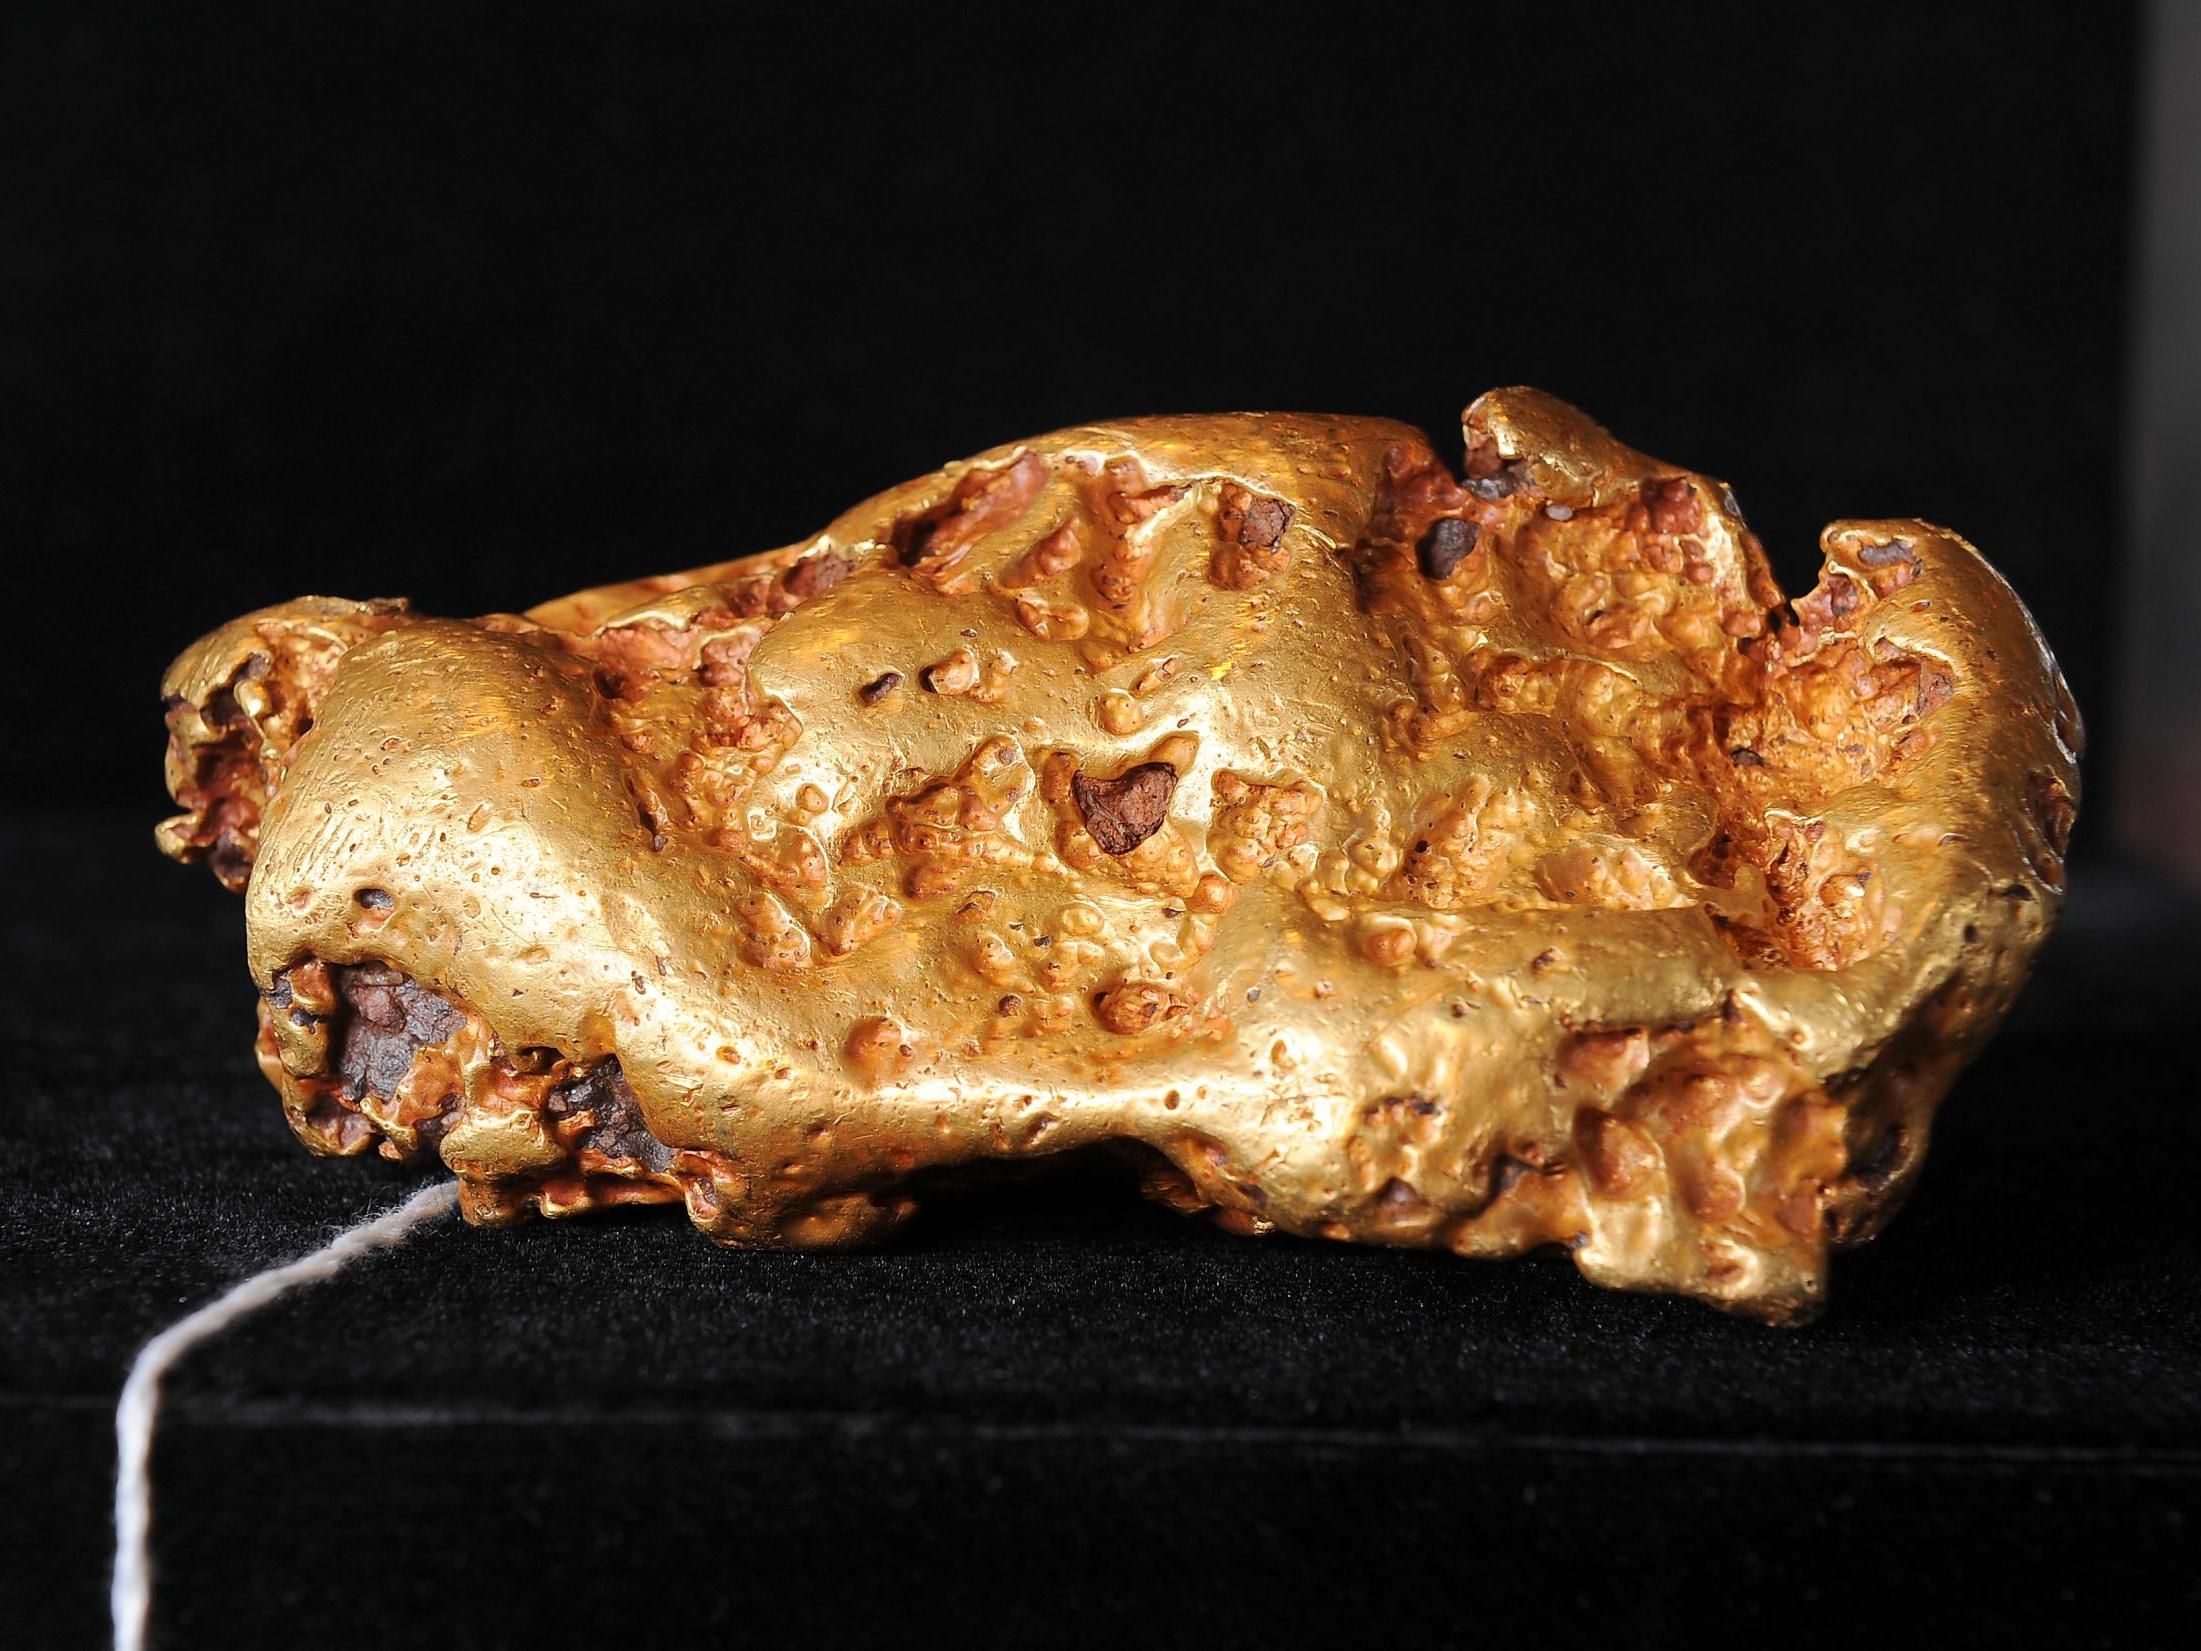 Giant gold nugget found in California could sell for $350,000 